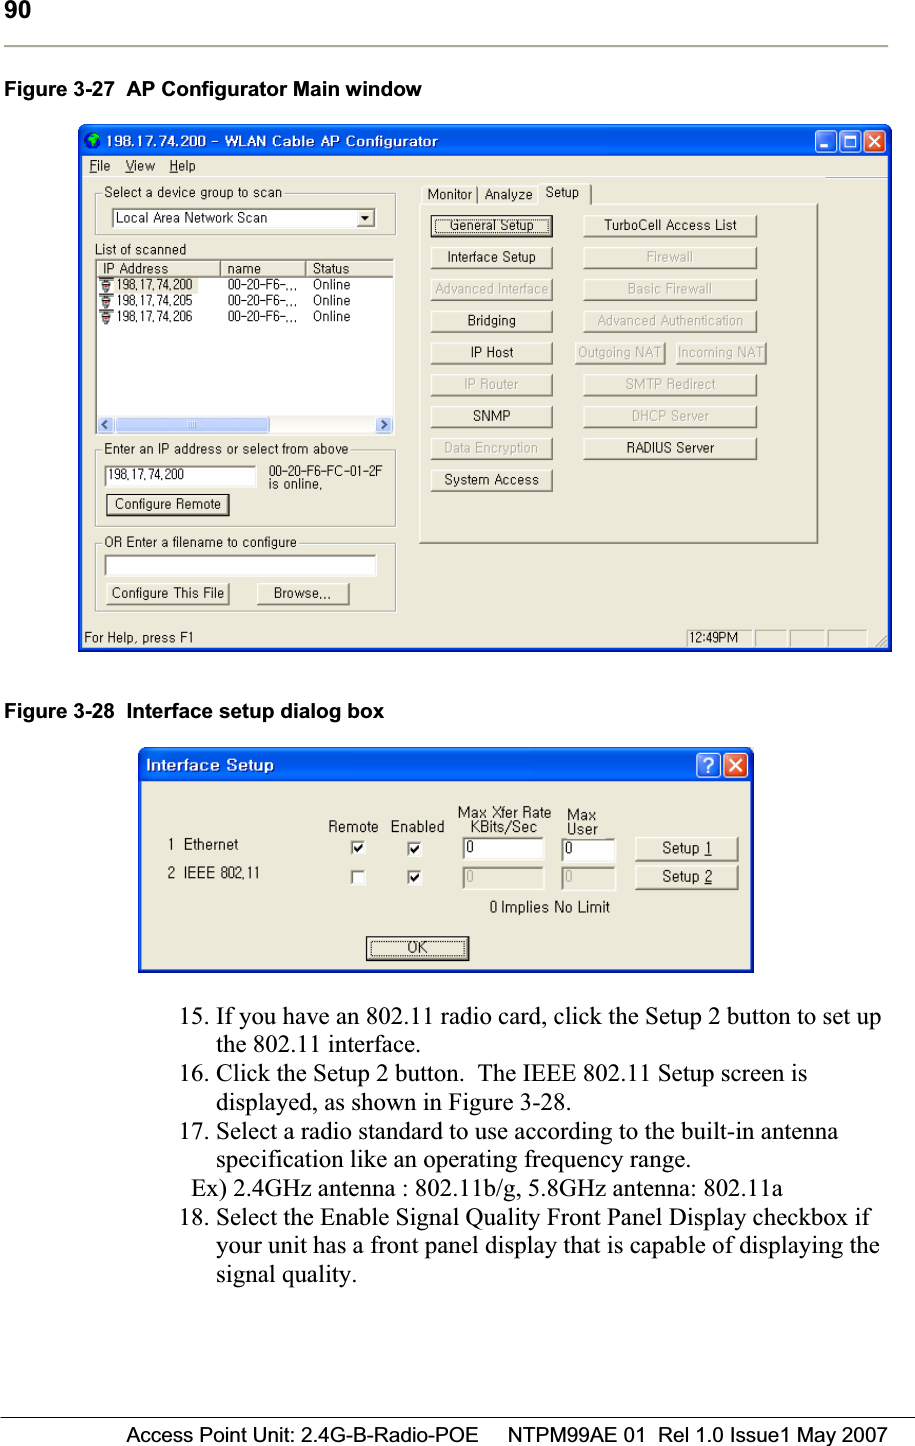 90 Access Point Unit: 2.4G-B-Radio-POE     NTPM99AE 01  Rel 1.0 Issue1 May 2007Figure 3-27  AP Configurator Main window Figure 3-28  Interface setup dialog box 15. If you have an 802.11 radio card, click the Setup 2 button to set up the 802.11 interface. 16. Click the Setup 2 button.  The IEEE 802.11 Setup screen is displayed, as shown in Figure 3-28. 17. Select a radio standard to use according to the built-in antenna specification like an operating frequency range.Ex) 2.4GHz antenna : 802.11b/g, 5.8GHz antenna: 802.11a18. Select the Enable Signal Quality Front Panel Display checkbox if your unit has a front panel display that is capable of displaying the signal quality. 